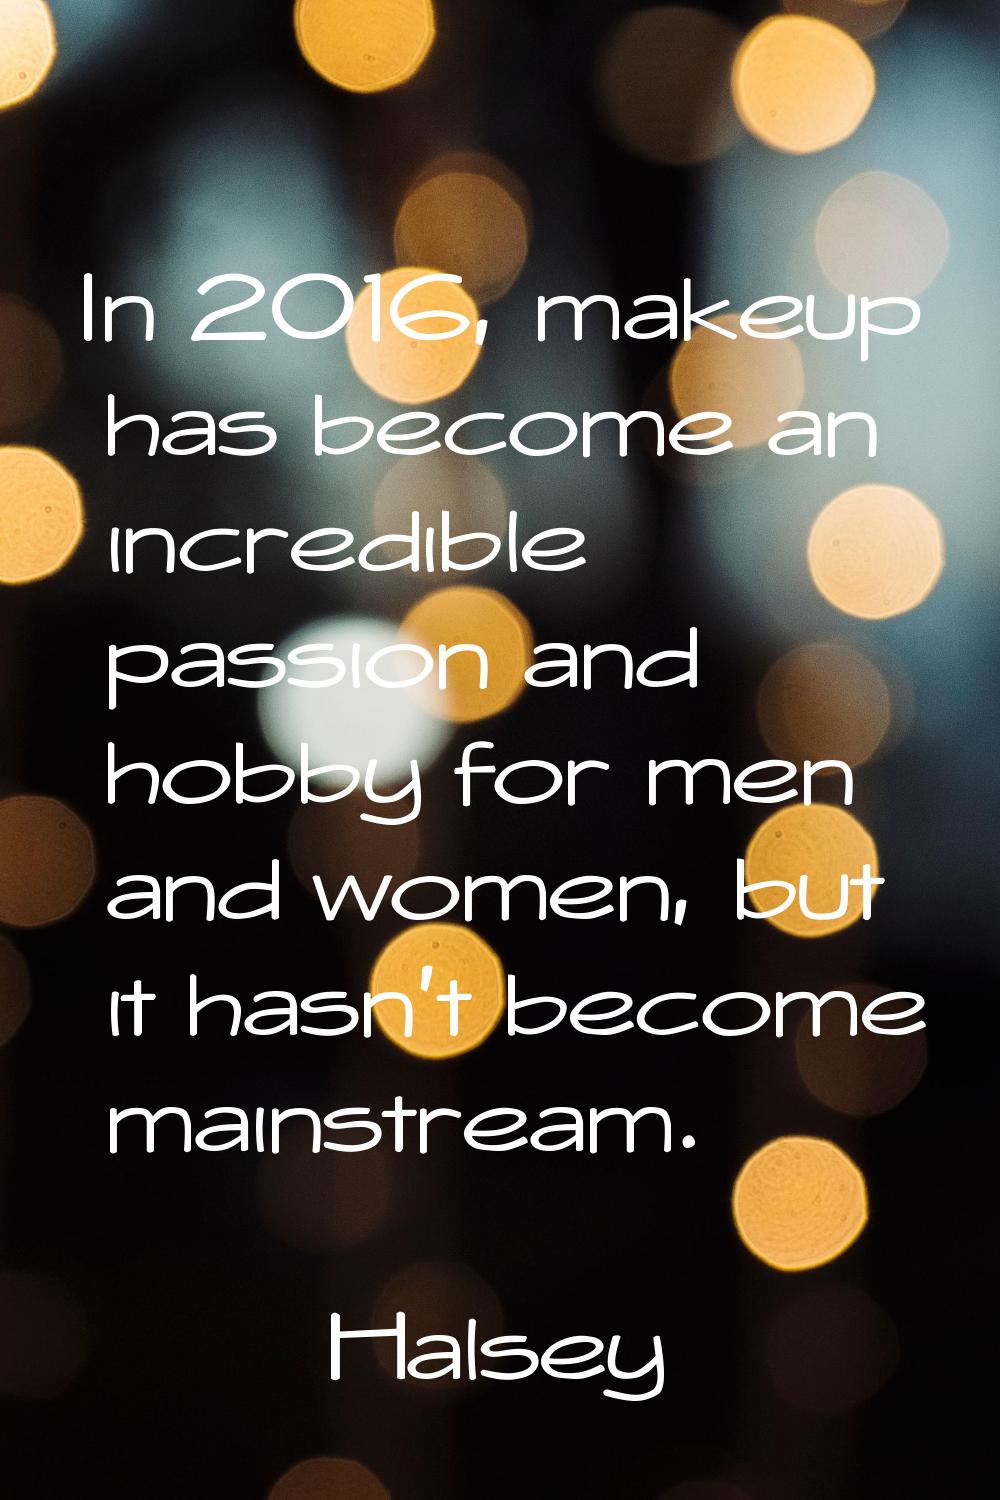 In 2016, makeup has become an incredible passion and hobby for men and women, but it hasn't become 